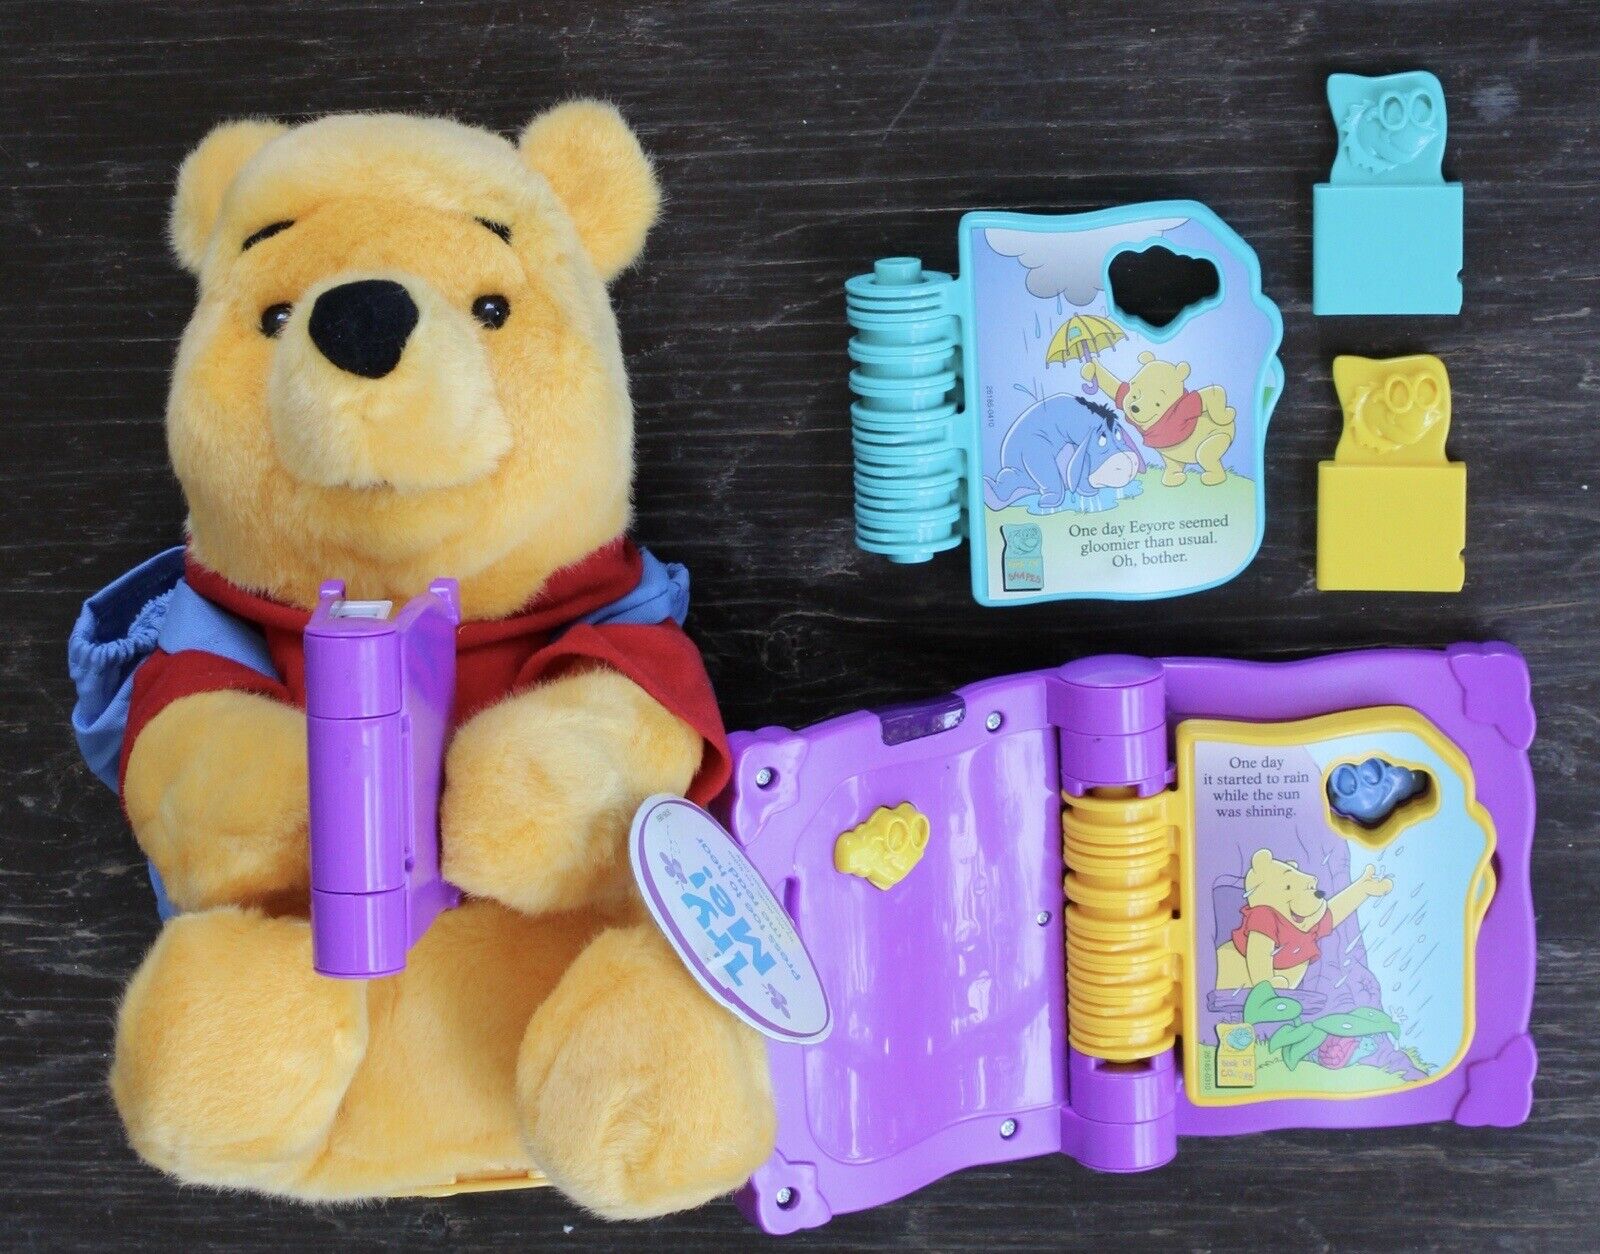 Mattel 2000 Winnie The Pooh Read With Me Story Telling Plush W Cartridges/Books